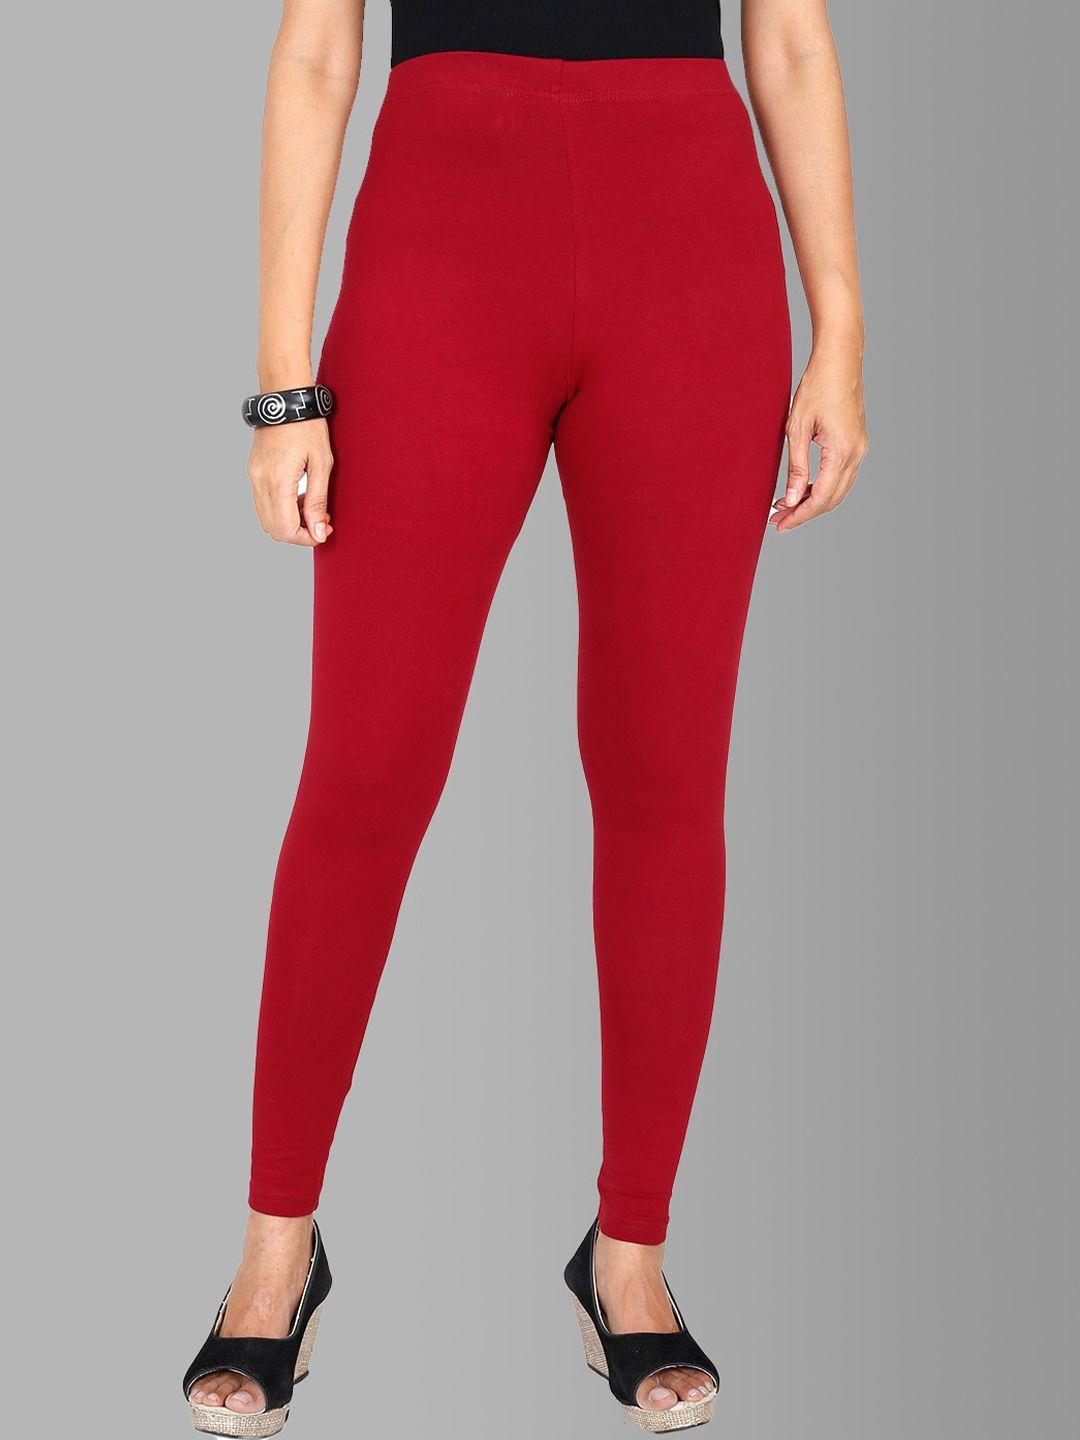 feather soft elite women maroon solid cotton ankle-length leggings